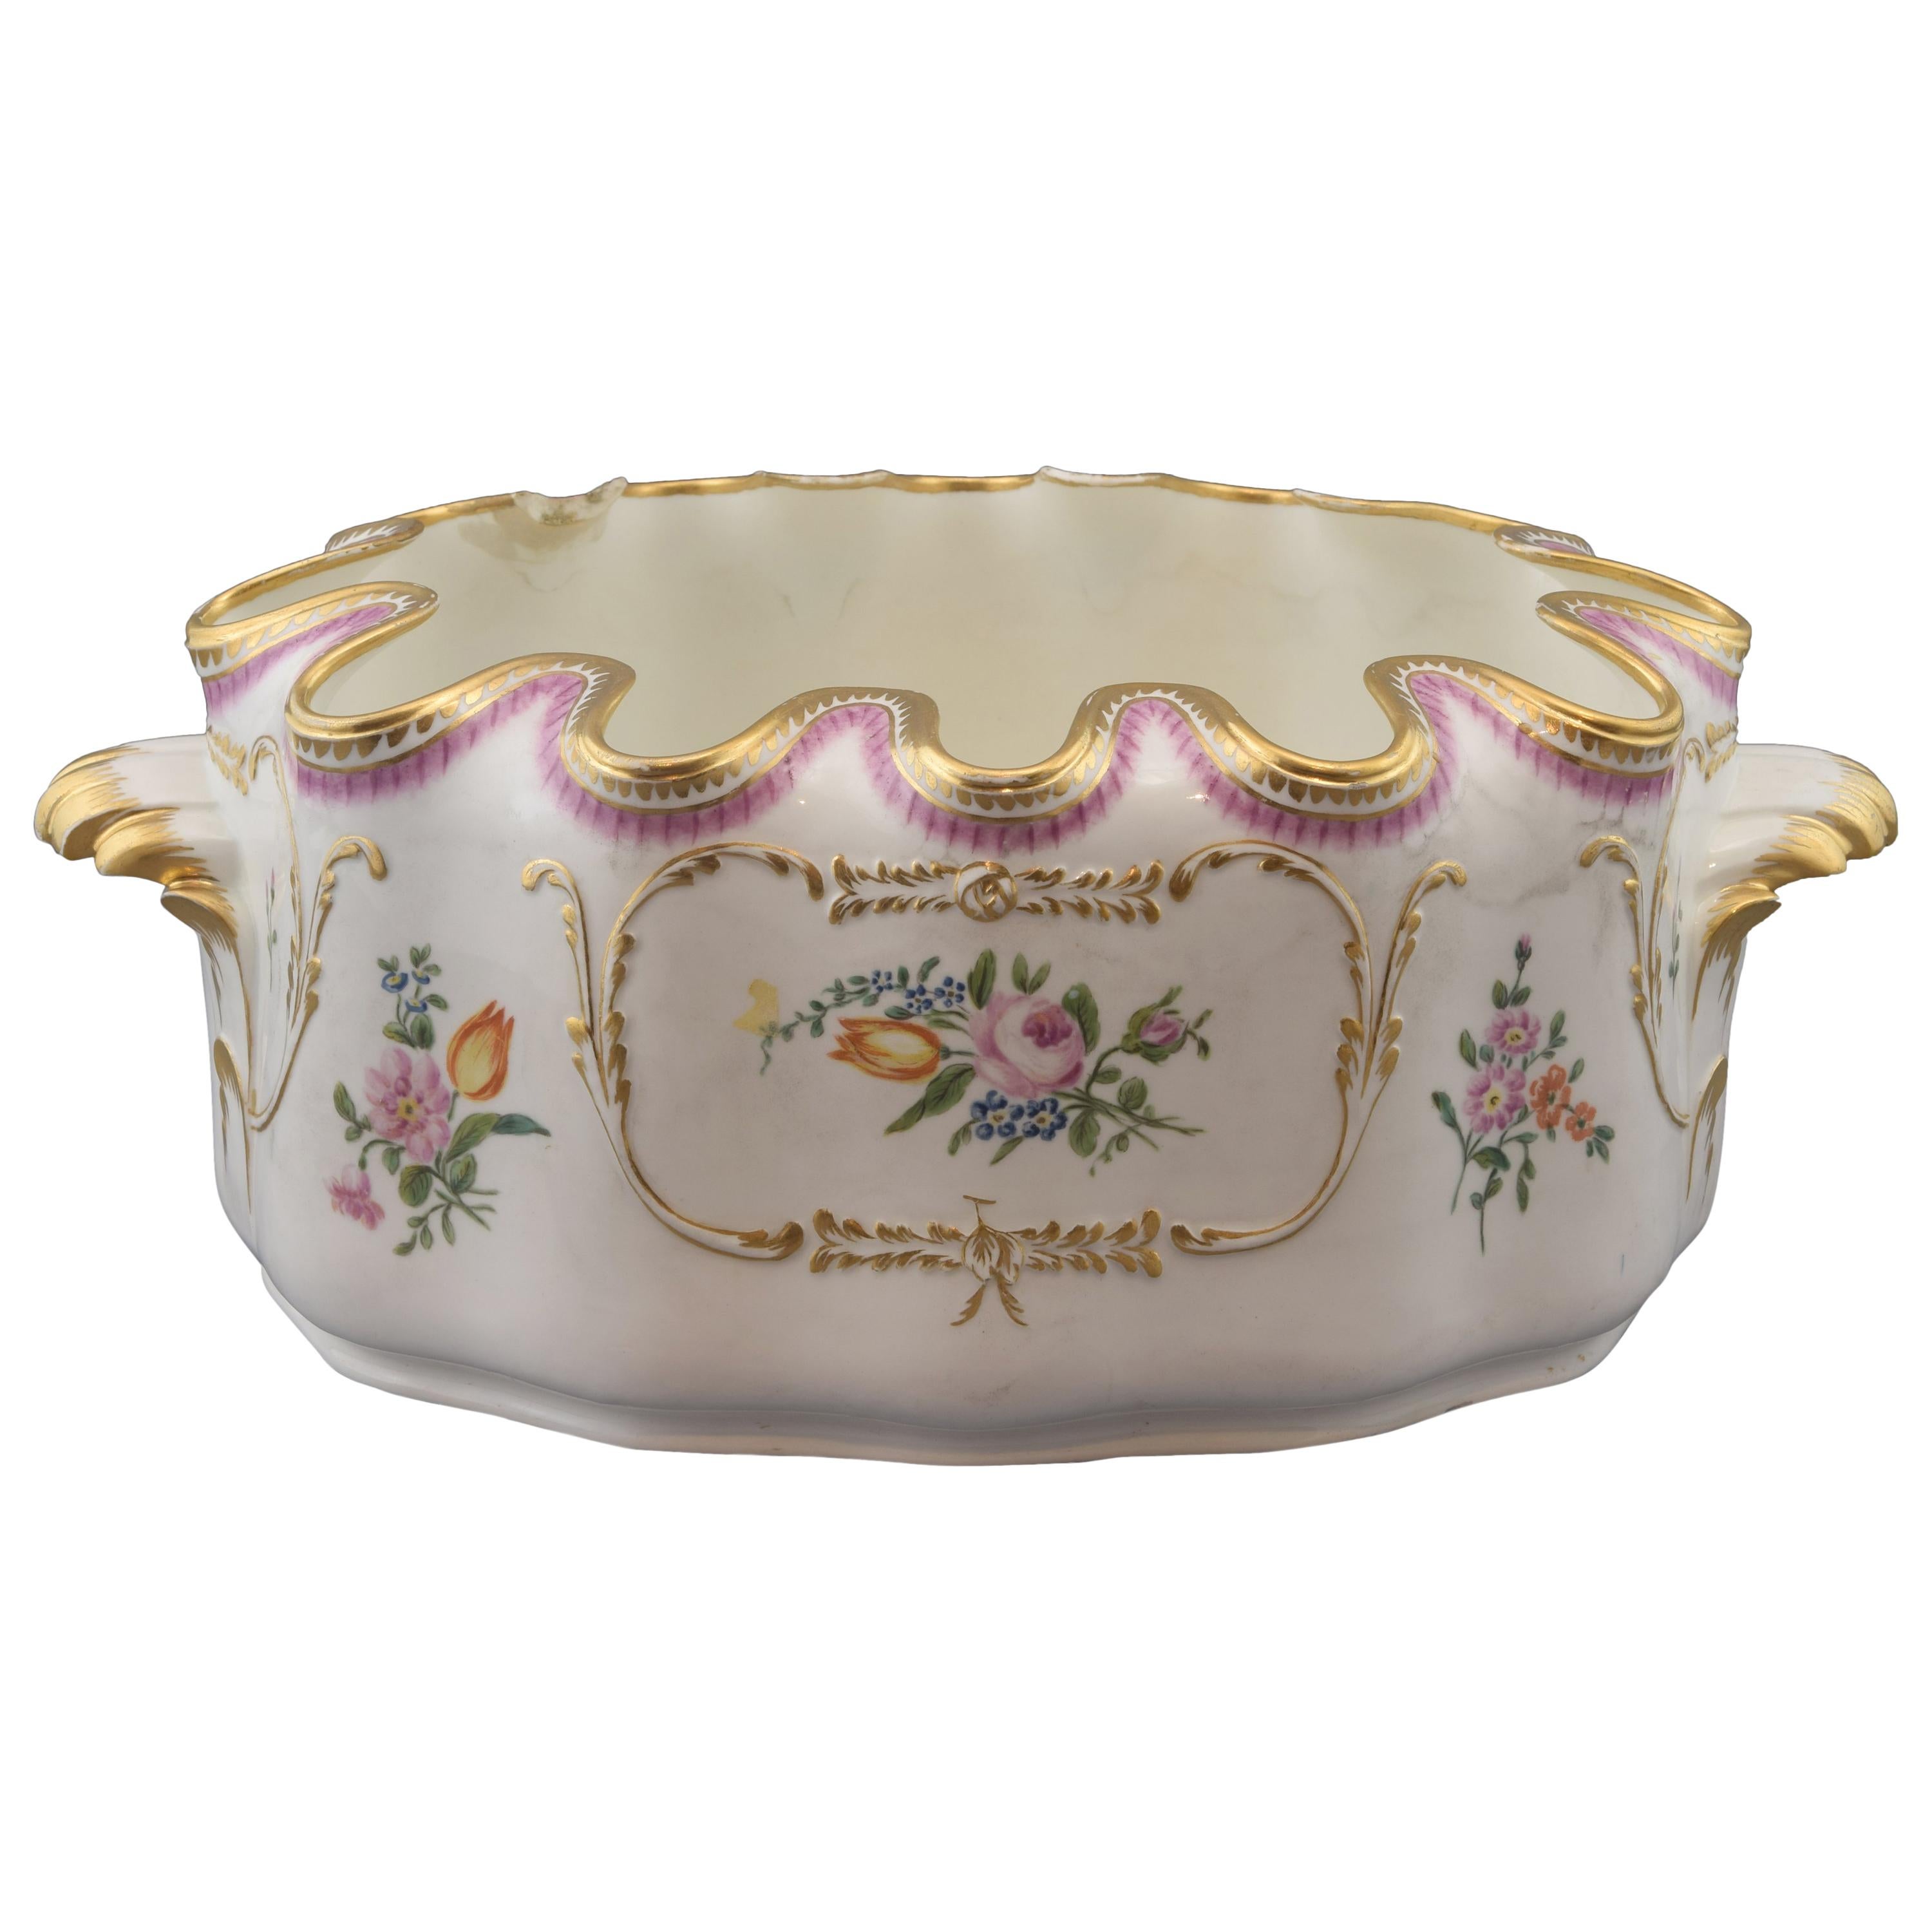 Cup Cooler, with Marks, Royal Porcelain Factory of Buen Retiro, Madrid For Sale